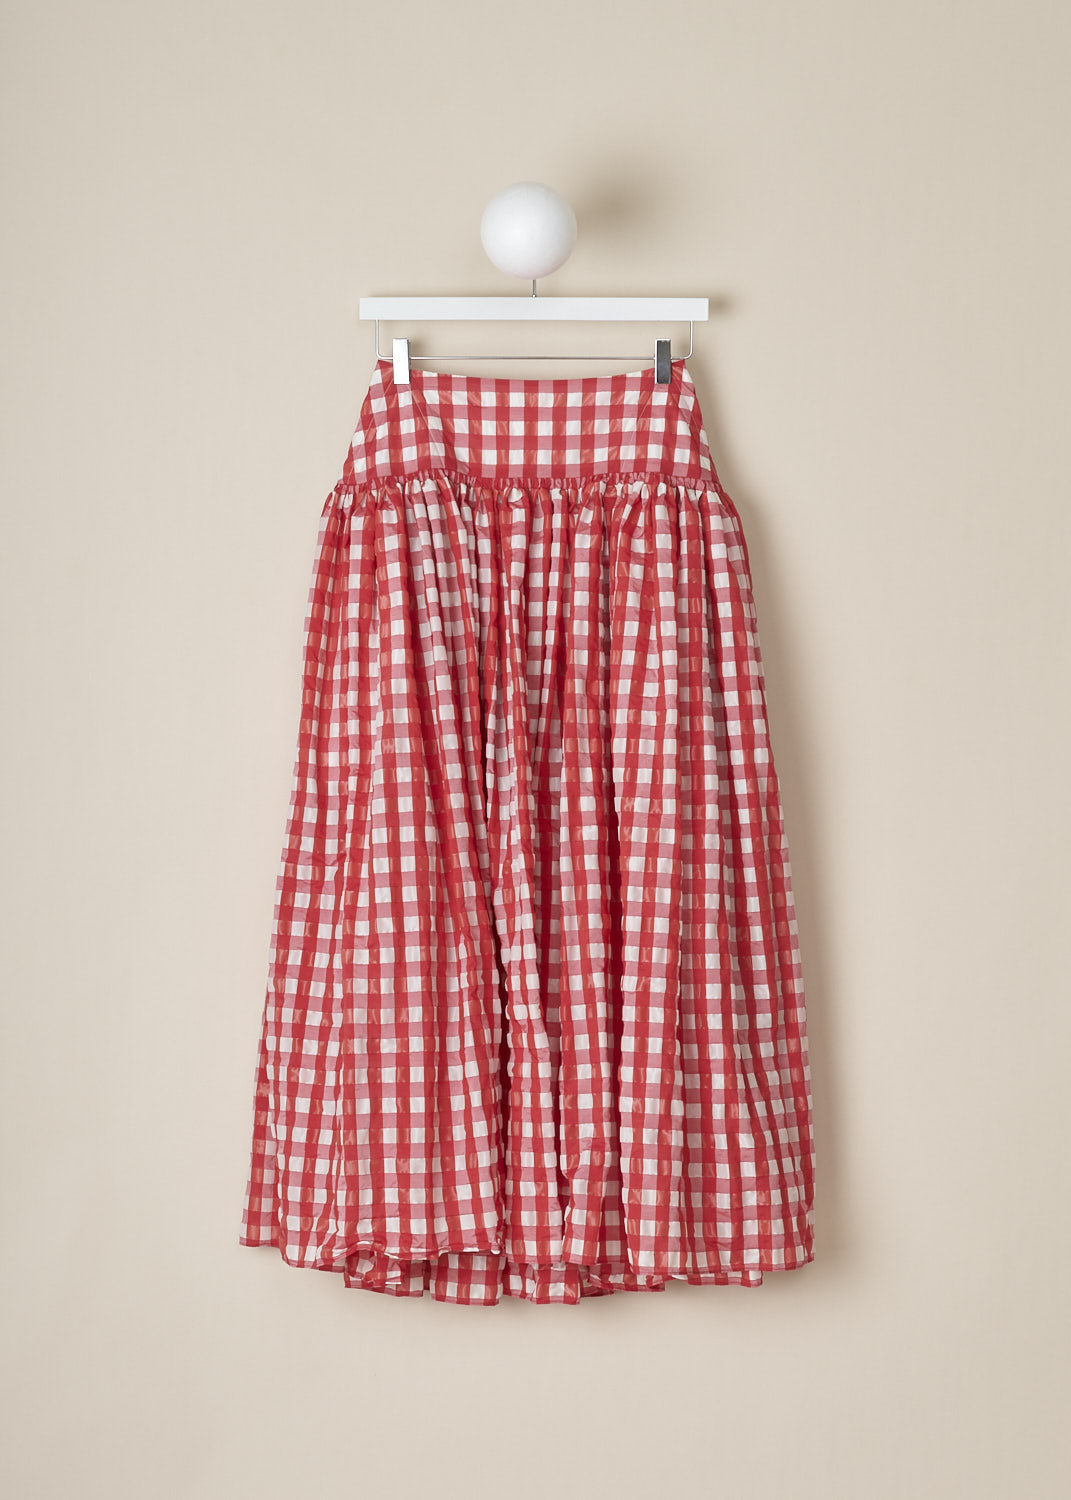 ALAÏA, RED GINGHAM MAXI SKIRT, AA9J04644T577, Red, White, Print, Front, This high-waisted red gingham maxi skirt hugs the waist and flares out to a voluminous maxi skirt. The skirt has concealed slanted pockets. In the back, a concealed centre zip functions as the closure option. 

